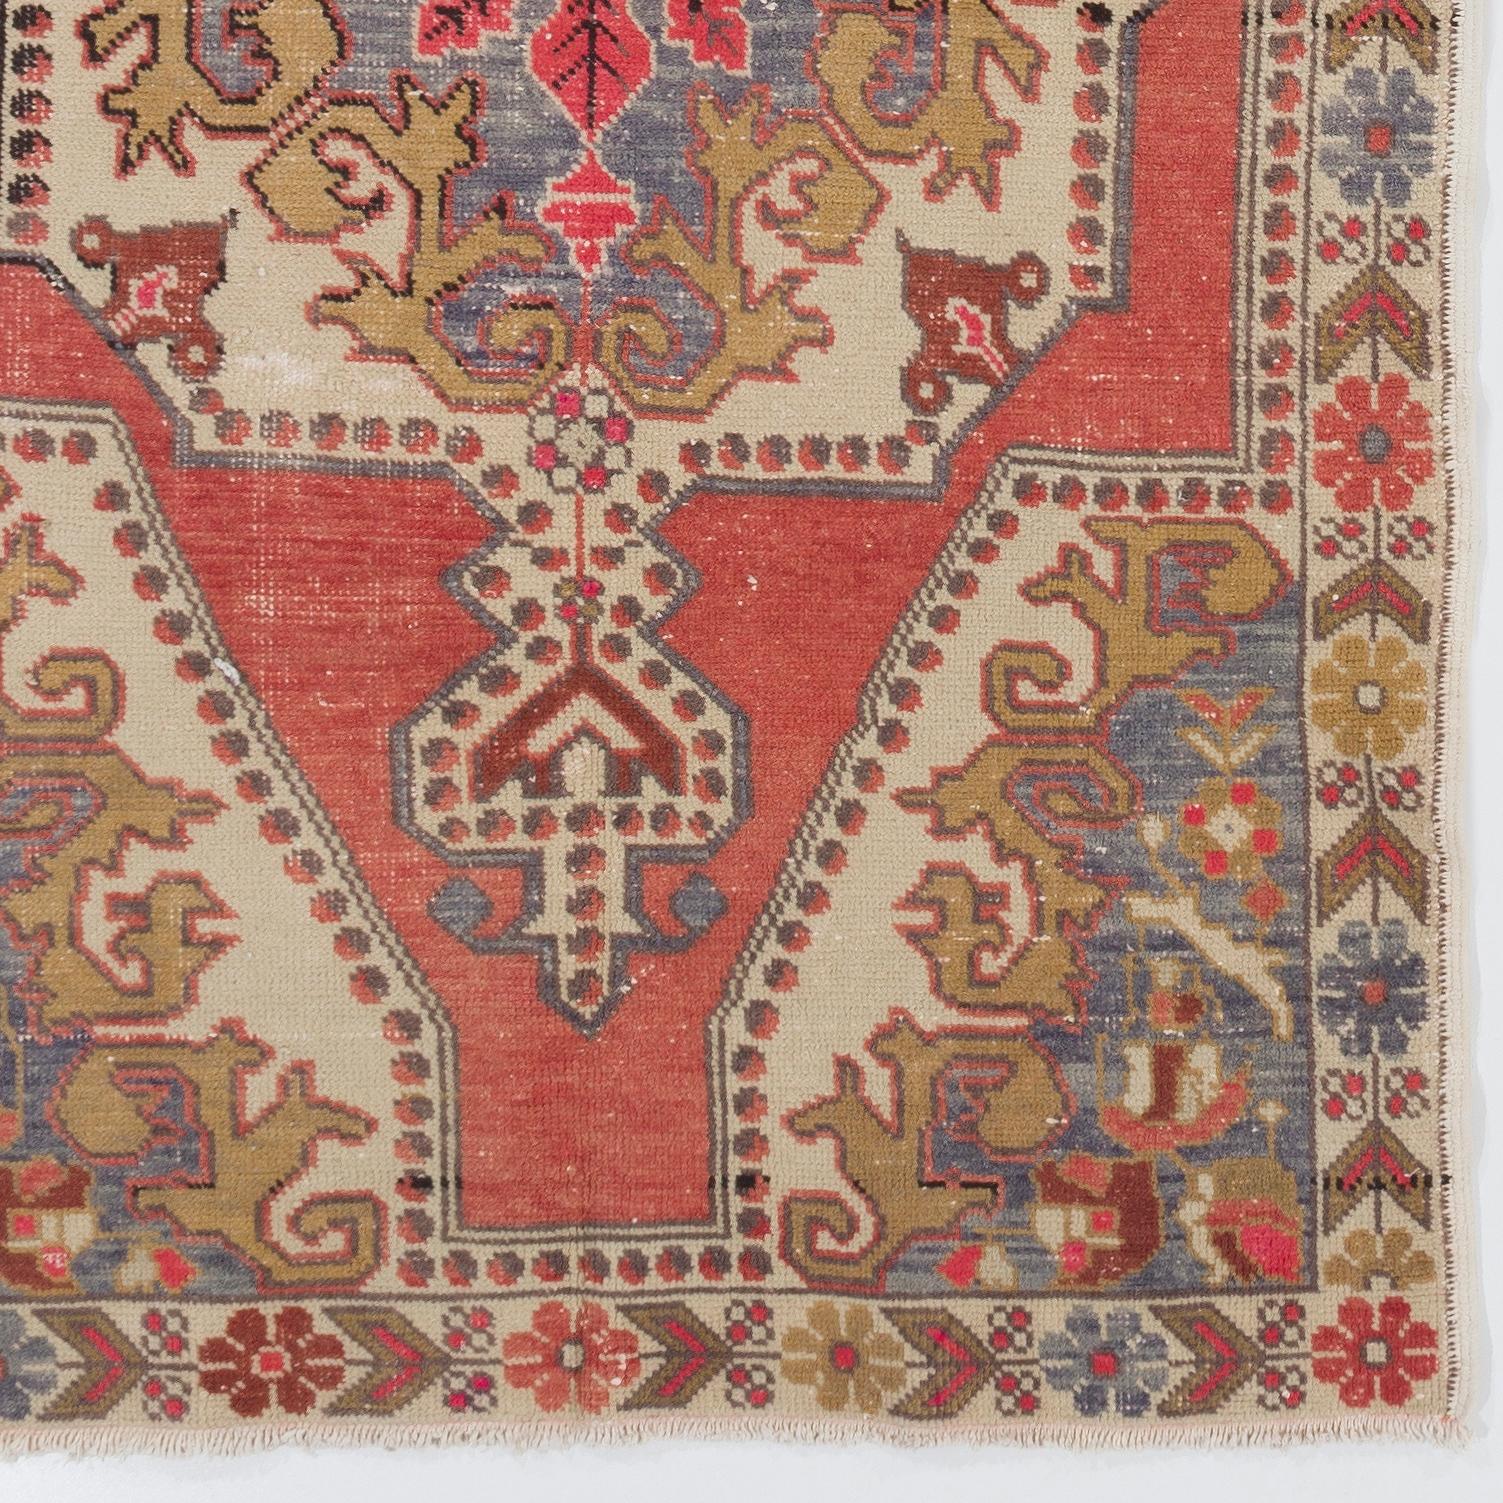 Hand-Woven 4.2x7.2 Ft Vintage Handmade Turkish Rug in Red with Medallion Design. Ca 1960 For Sale